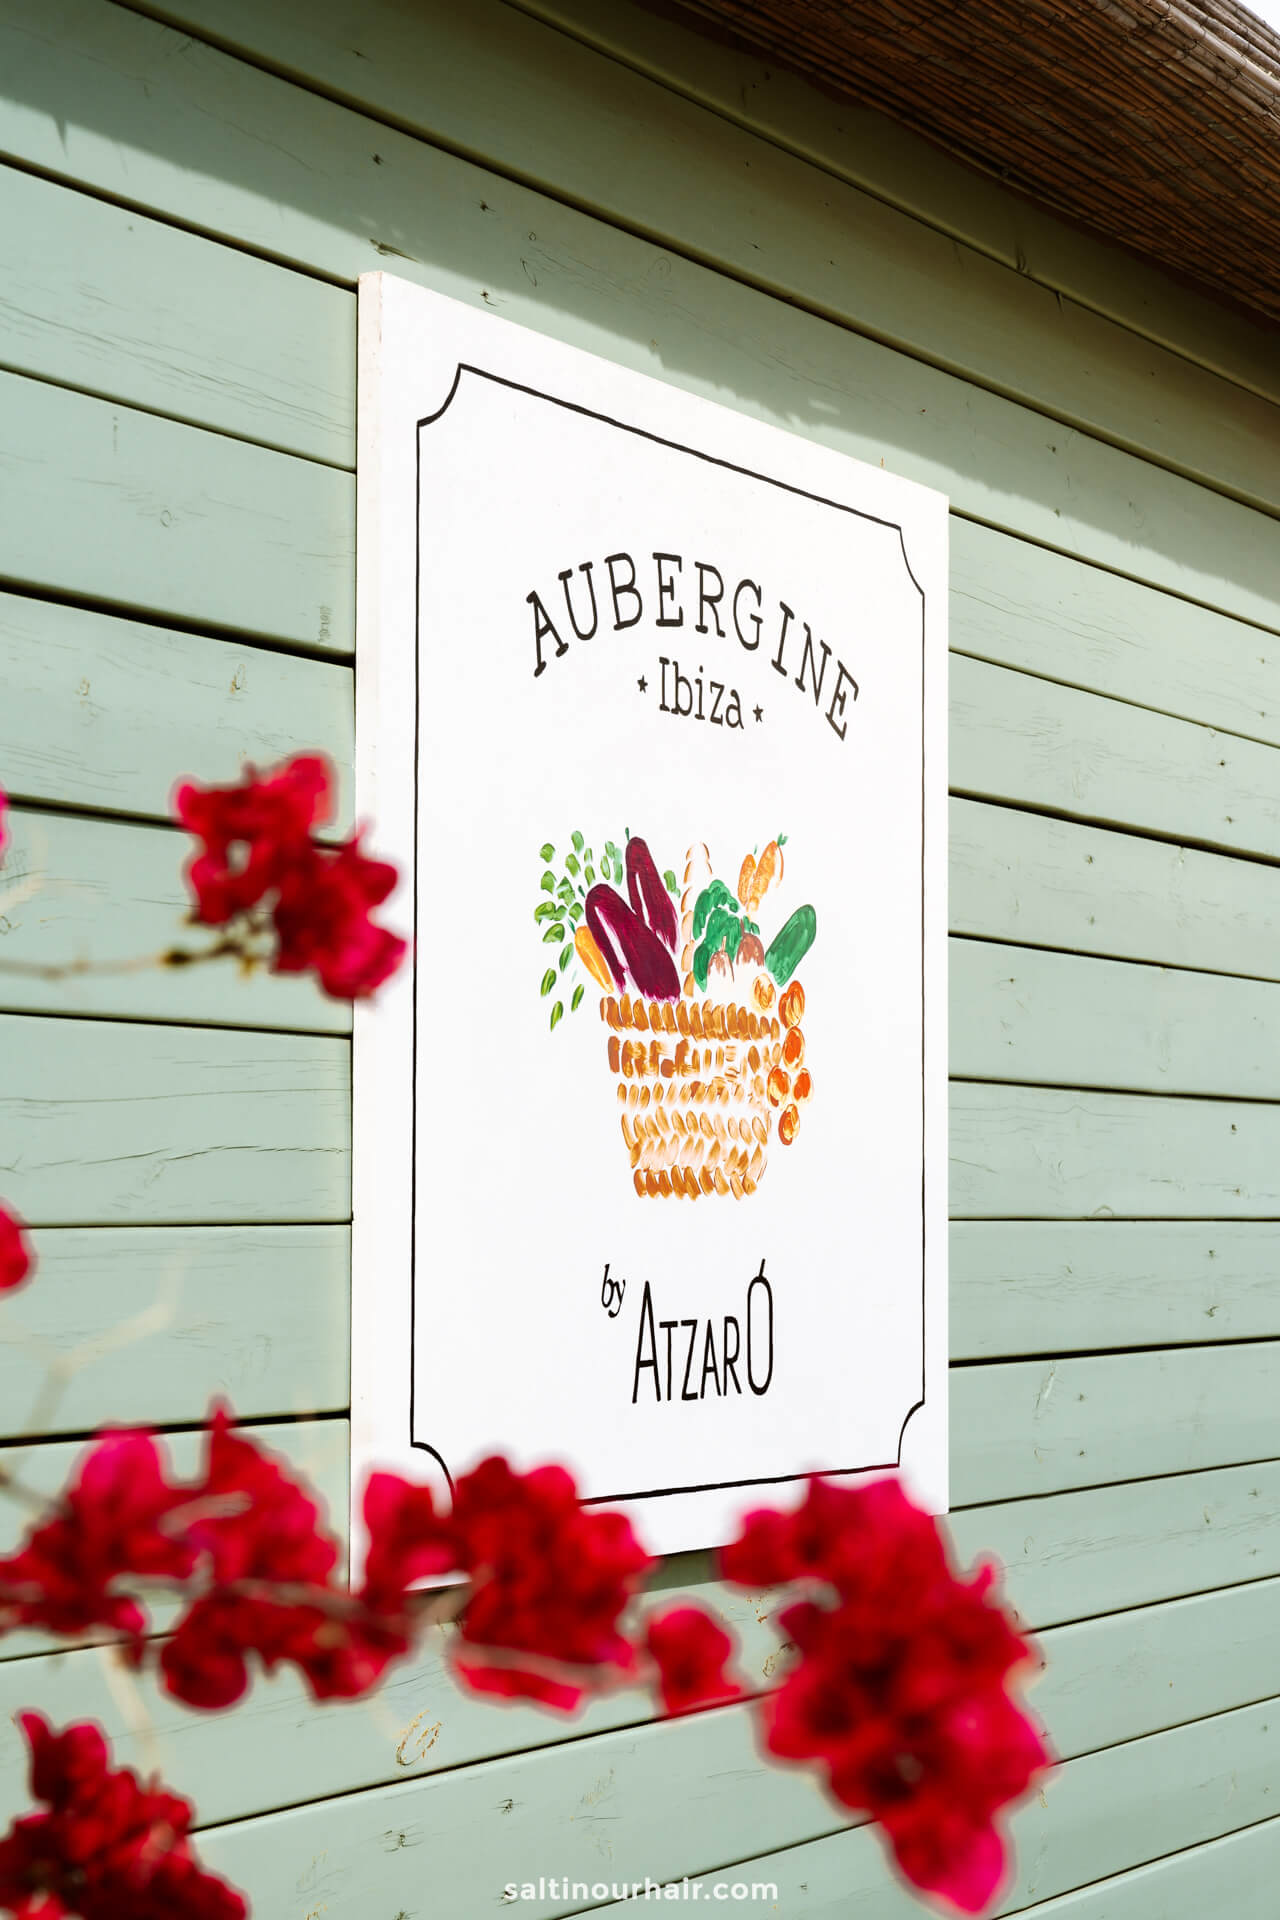 Aubergine restaurant sign things to do in Ibiza